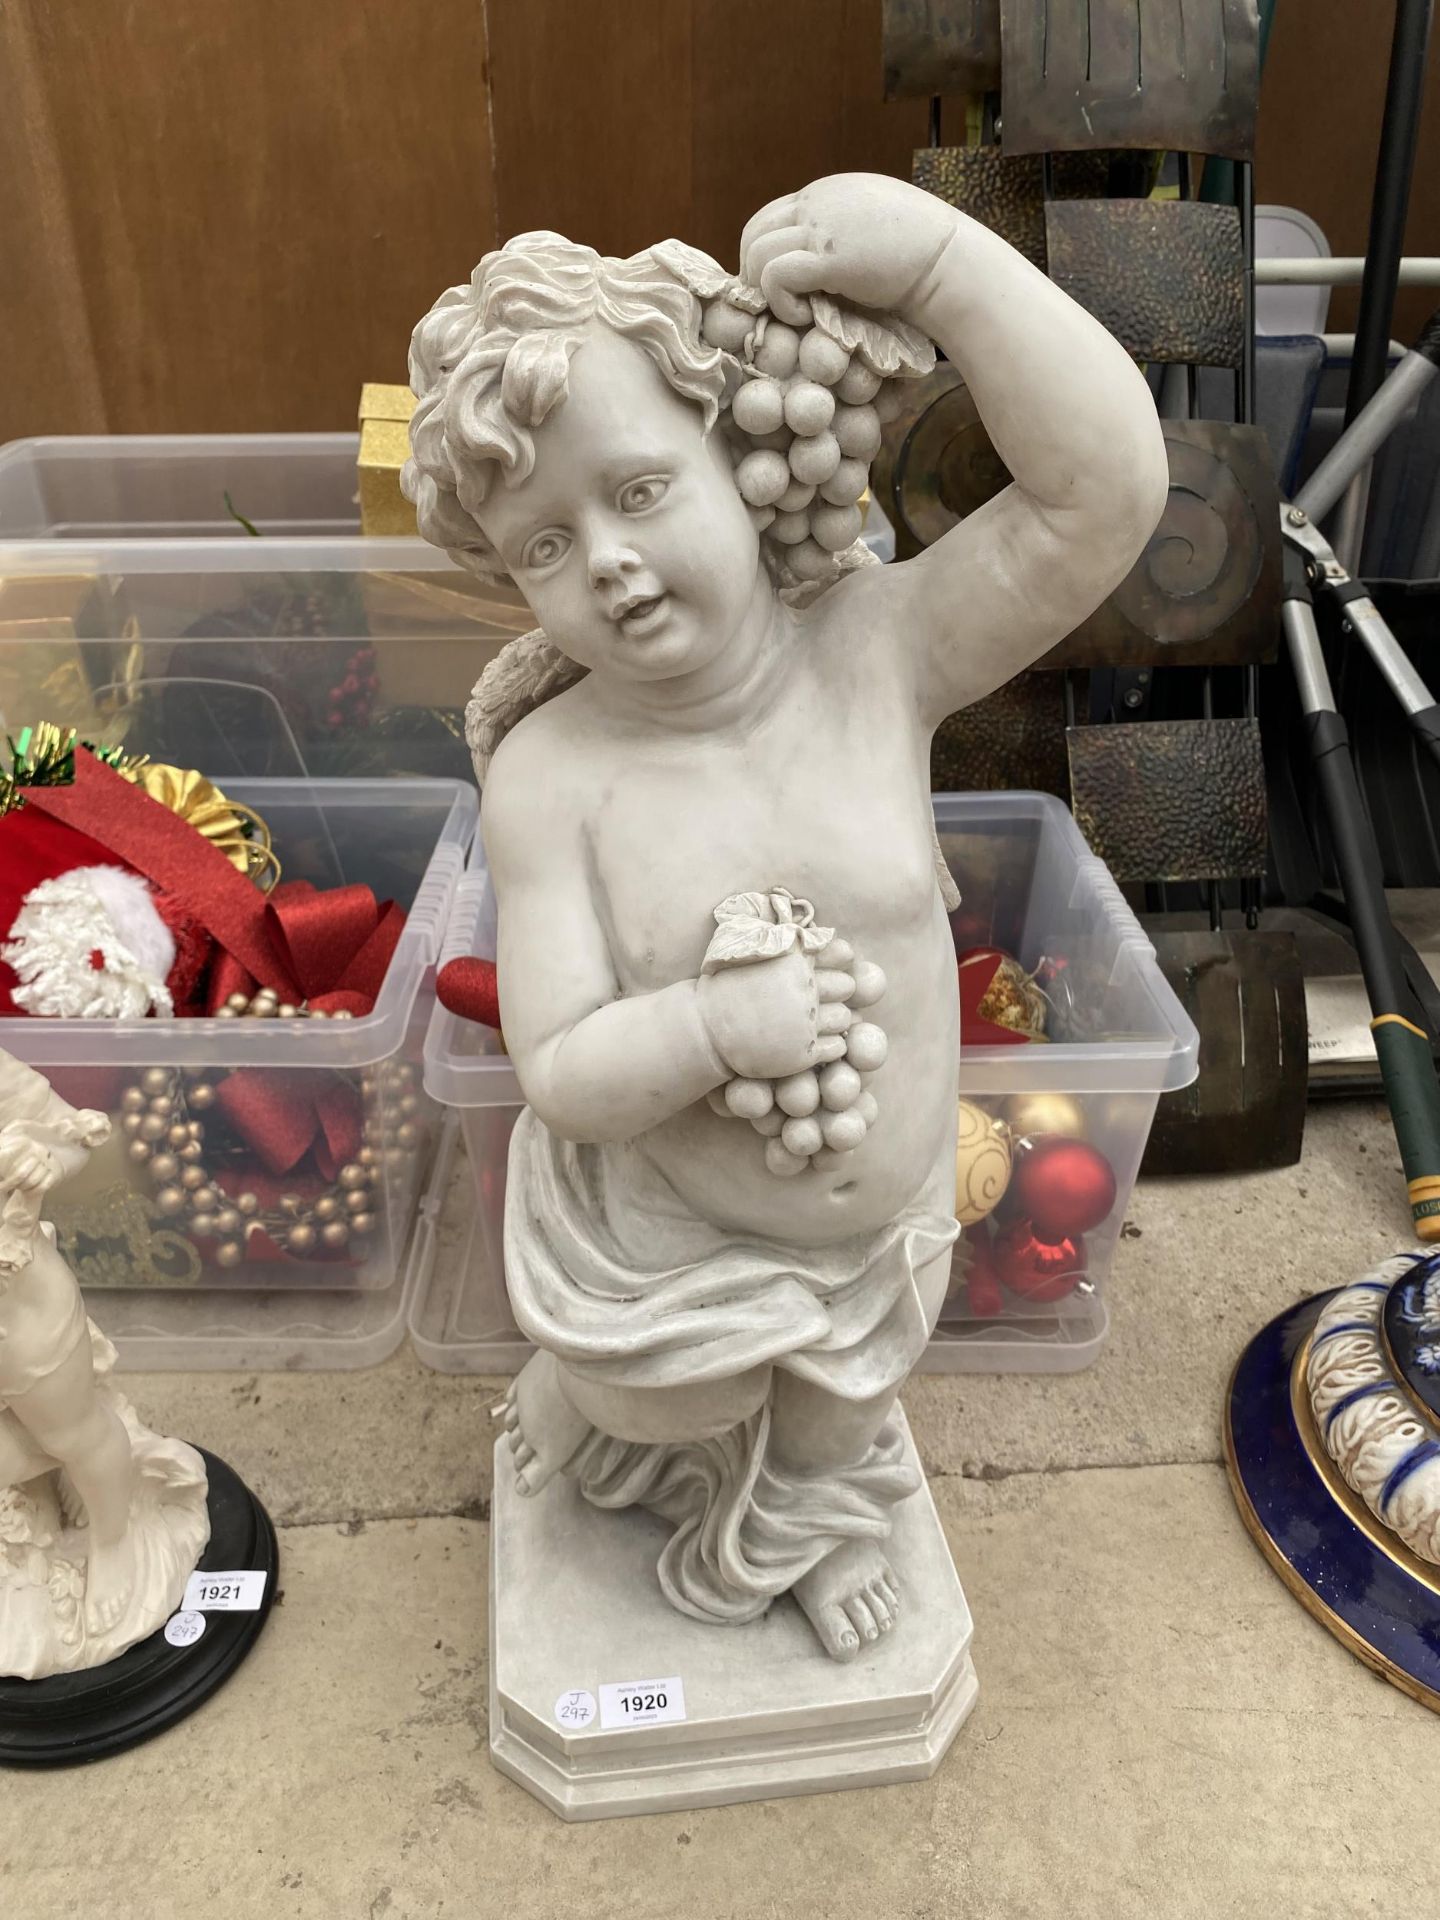 A RESIN TYPE MODEL OF A CHERUB HOLDING GRAPES